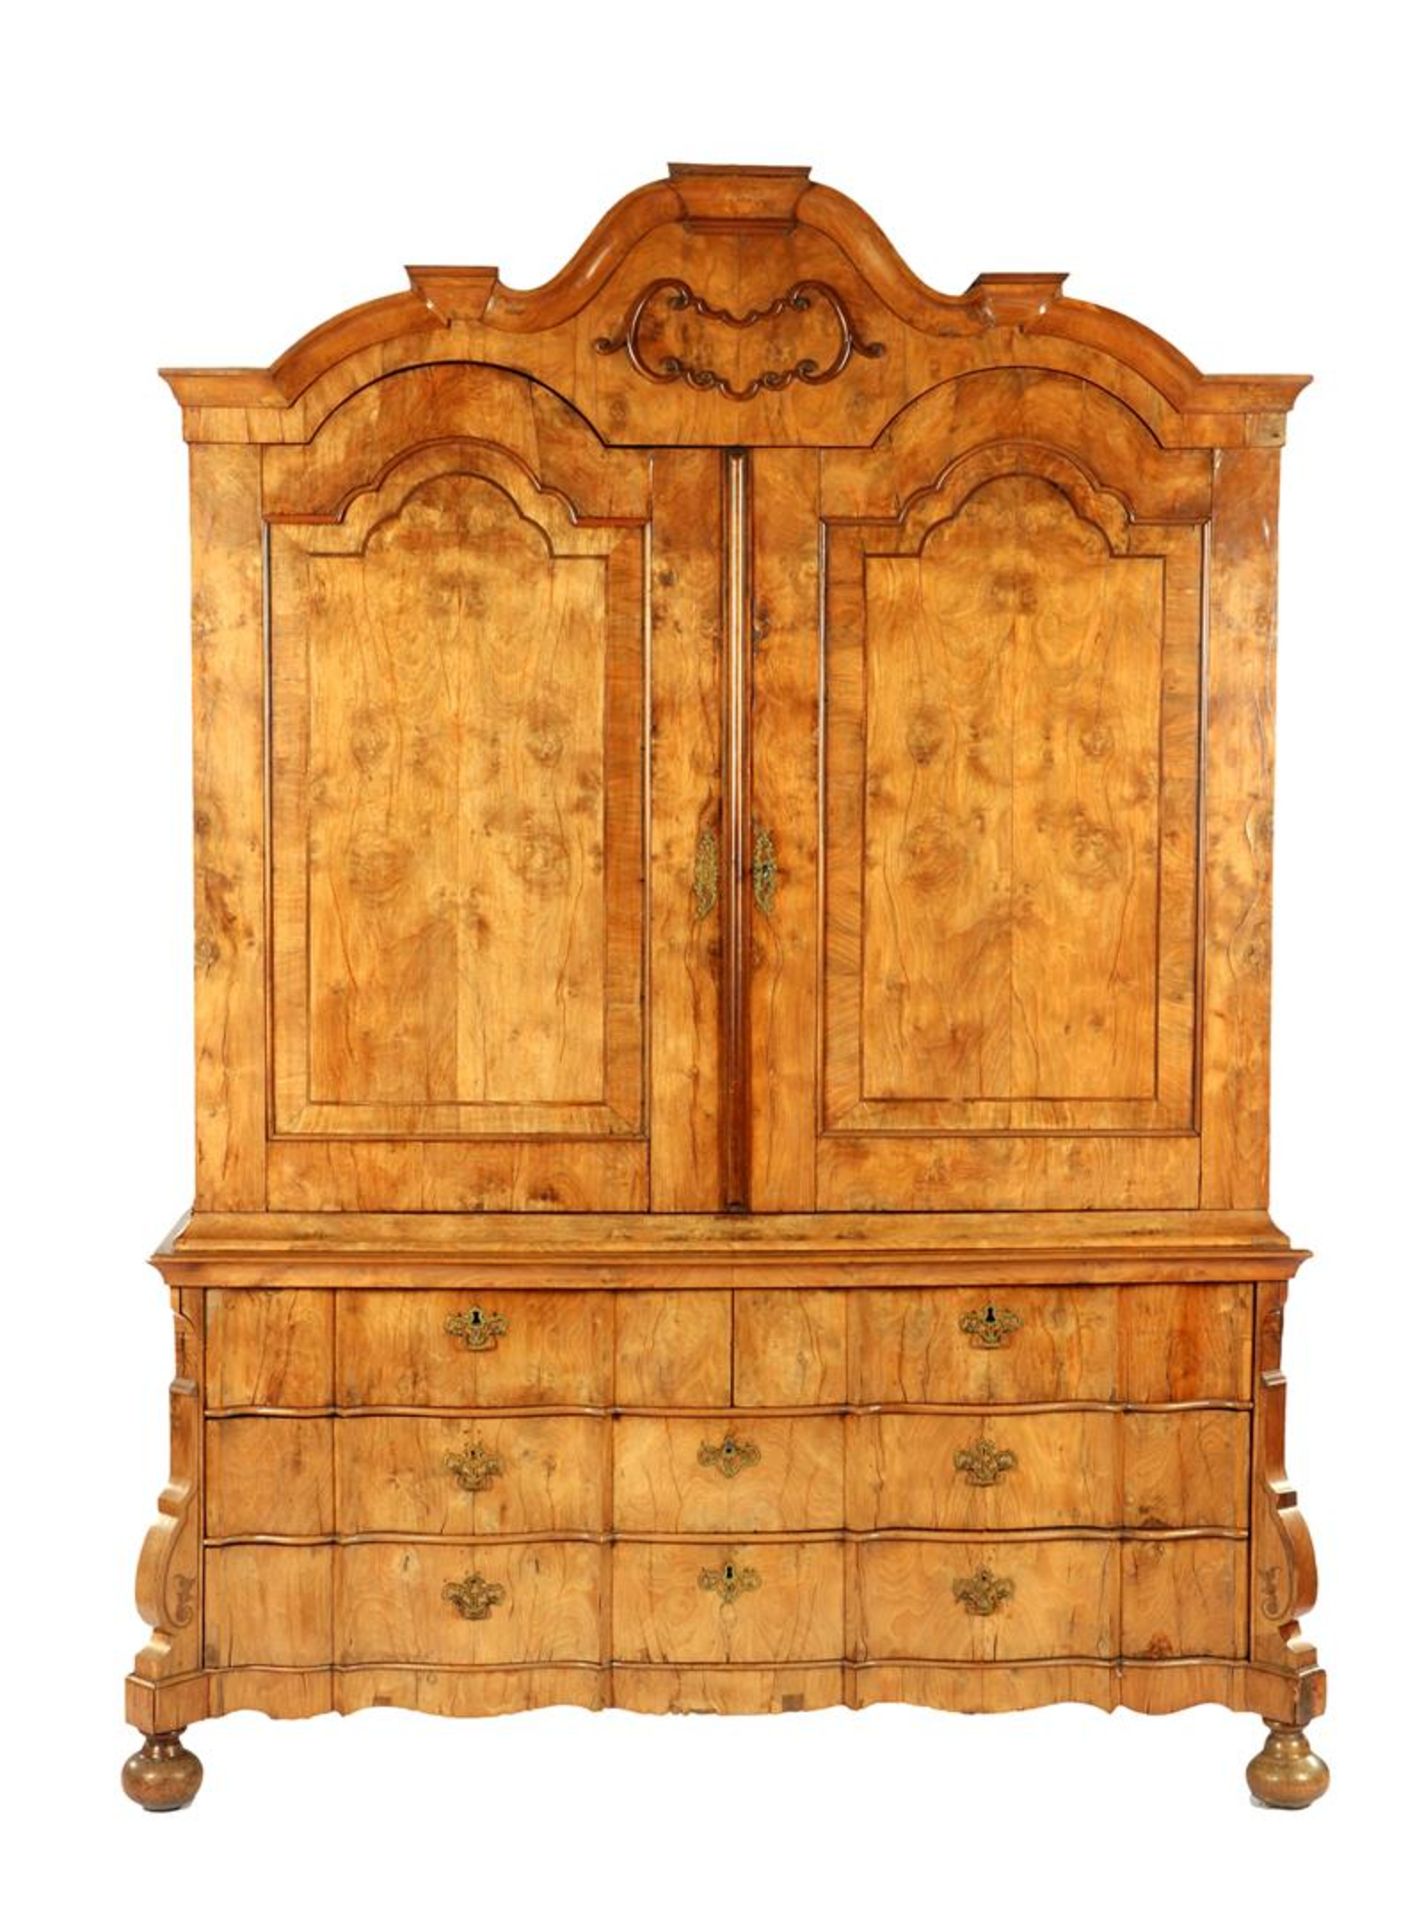 Mahogany veneer on oak 18th century cabinet with 3-drawer organ curved base cabinet 238 cm high, 178